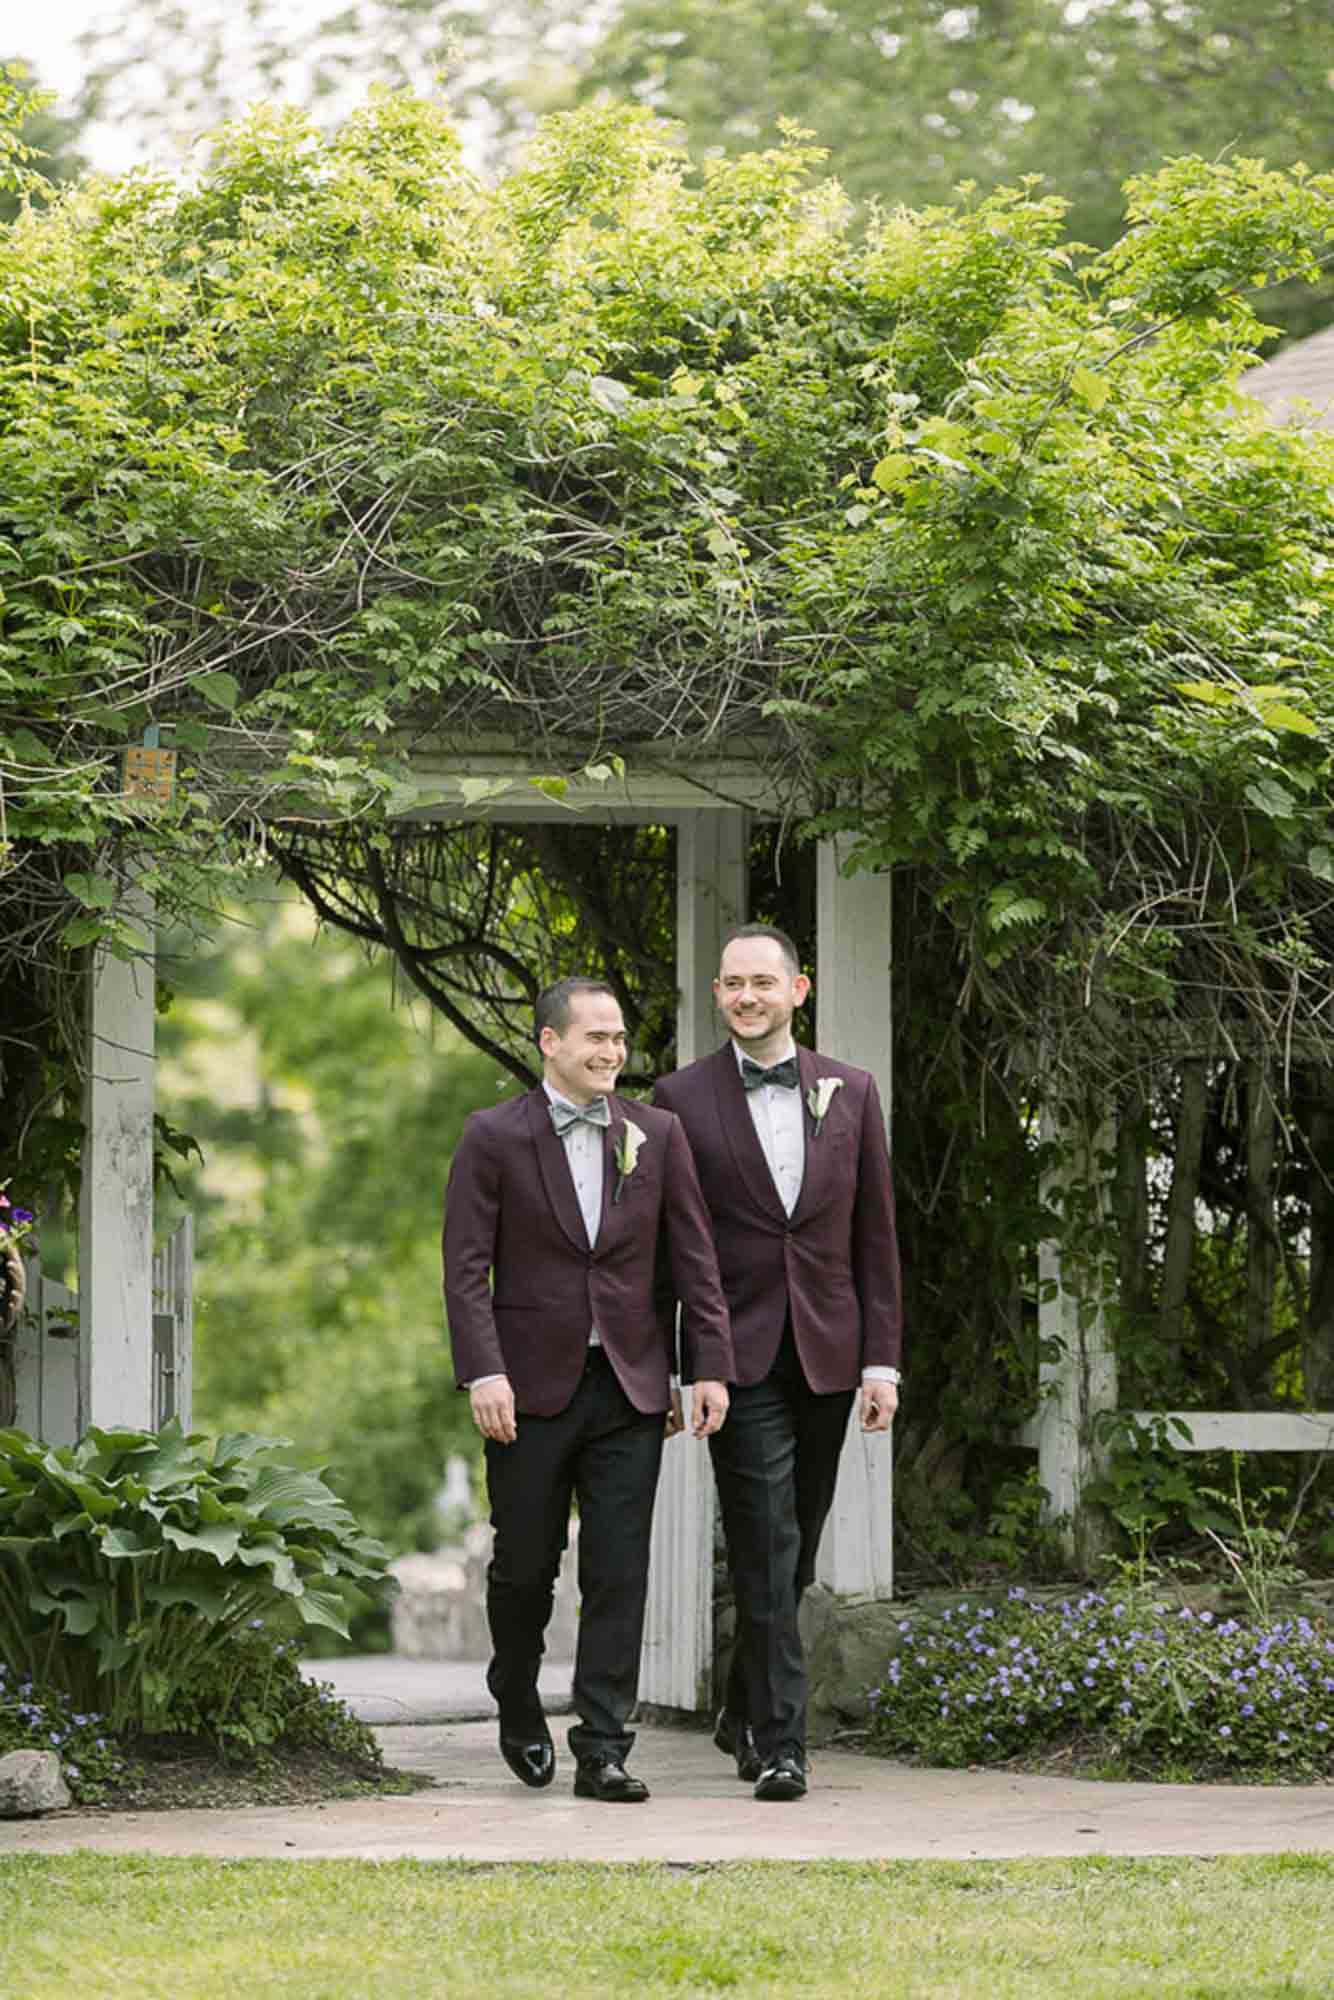 grooms walking into wedding together hand in hand wearing eggplant purple suit jackets LGBTQ+ wedding featured on Equally Wed magazine with two grooms Brian + Brett: Hudson Valley garden wedding with shades of purple Upasana Mainali Photography outdoor wedding ceremony